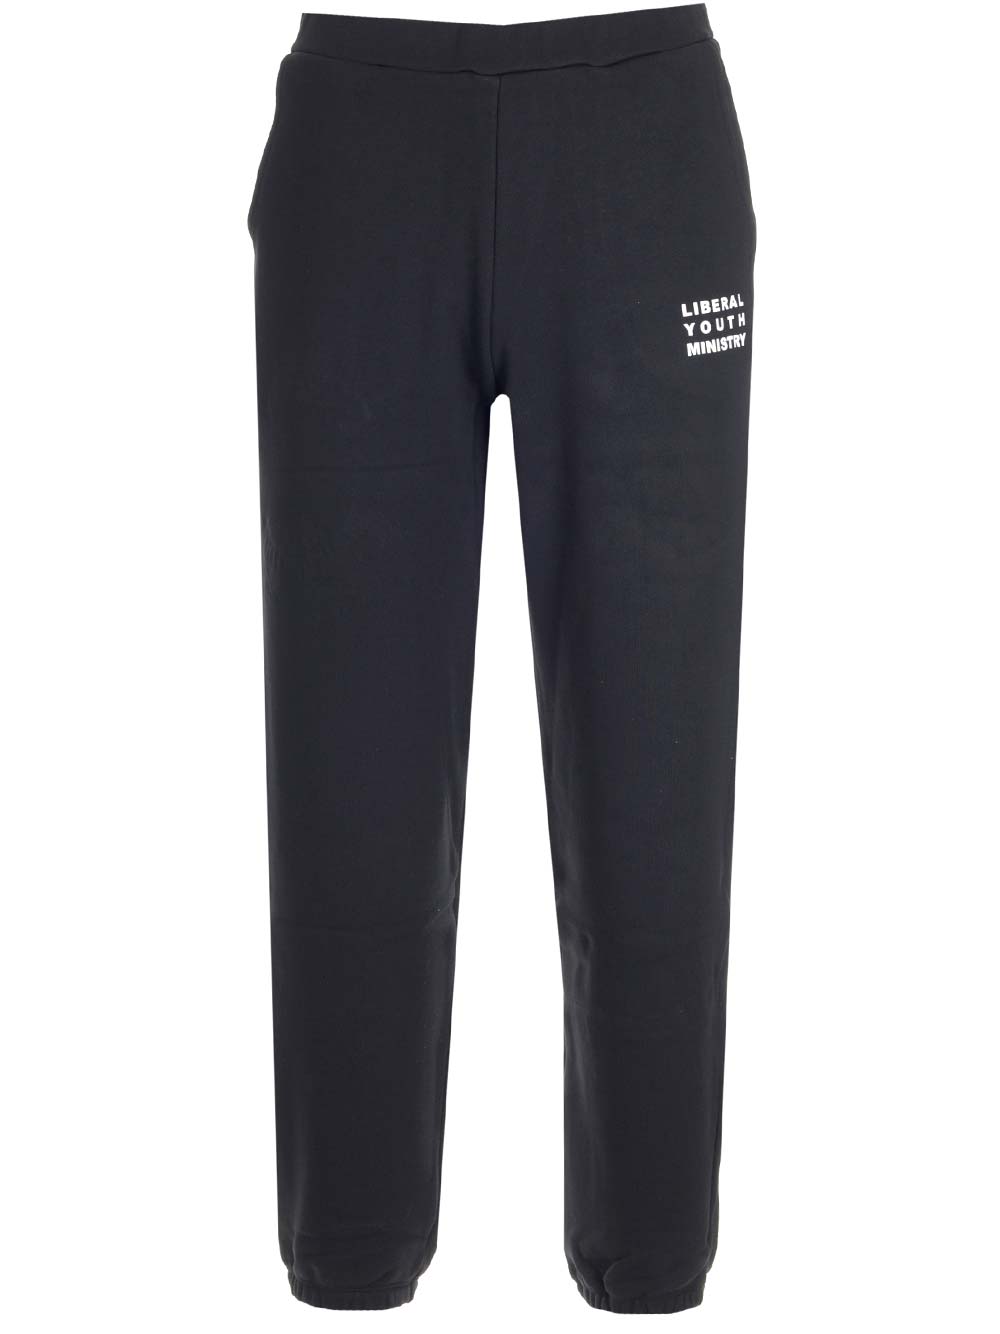 LIBERAL YOUTH MINISTRY BLACK COTTON TRACK PANT